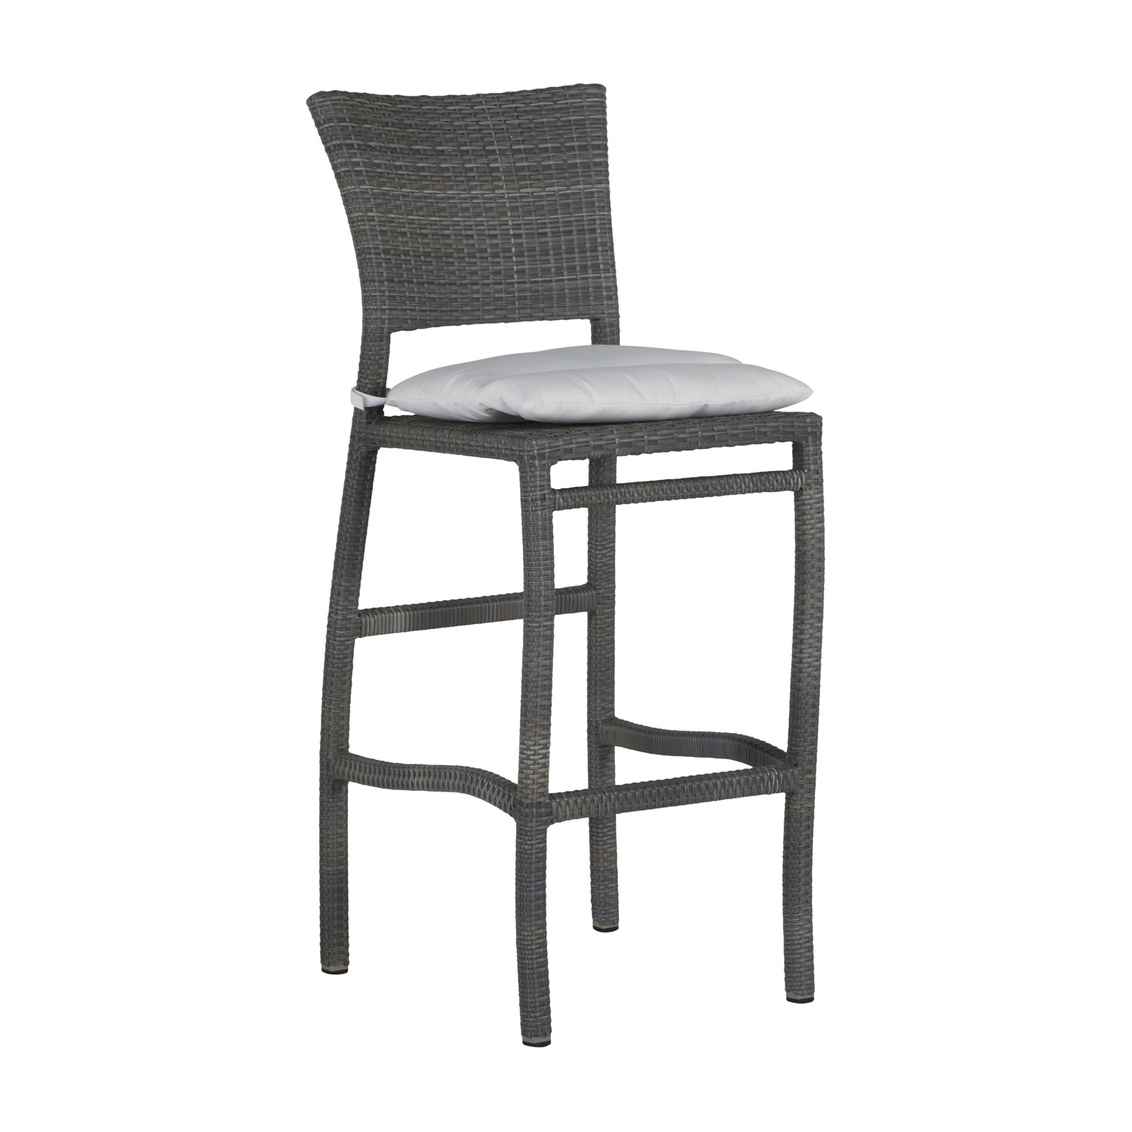 30 inch skye bar stool in slate grey – frame only product image